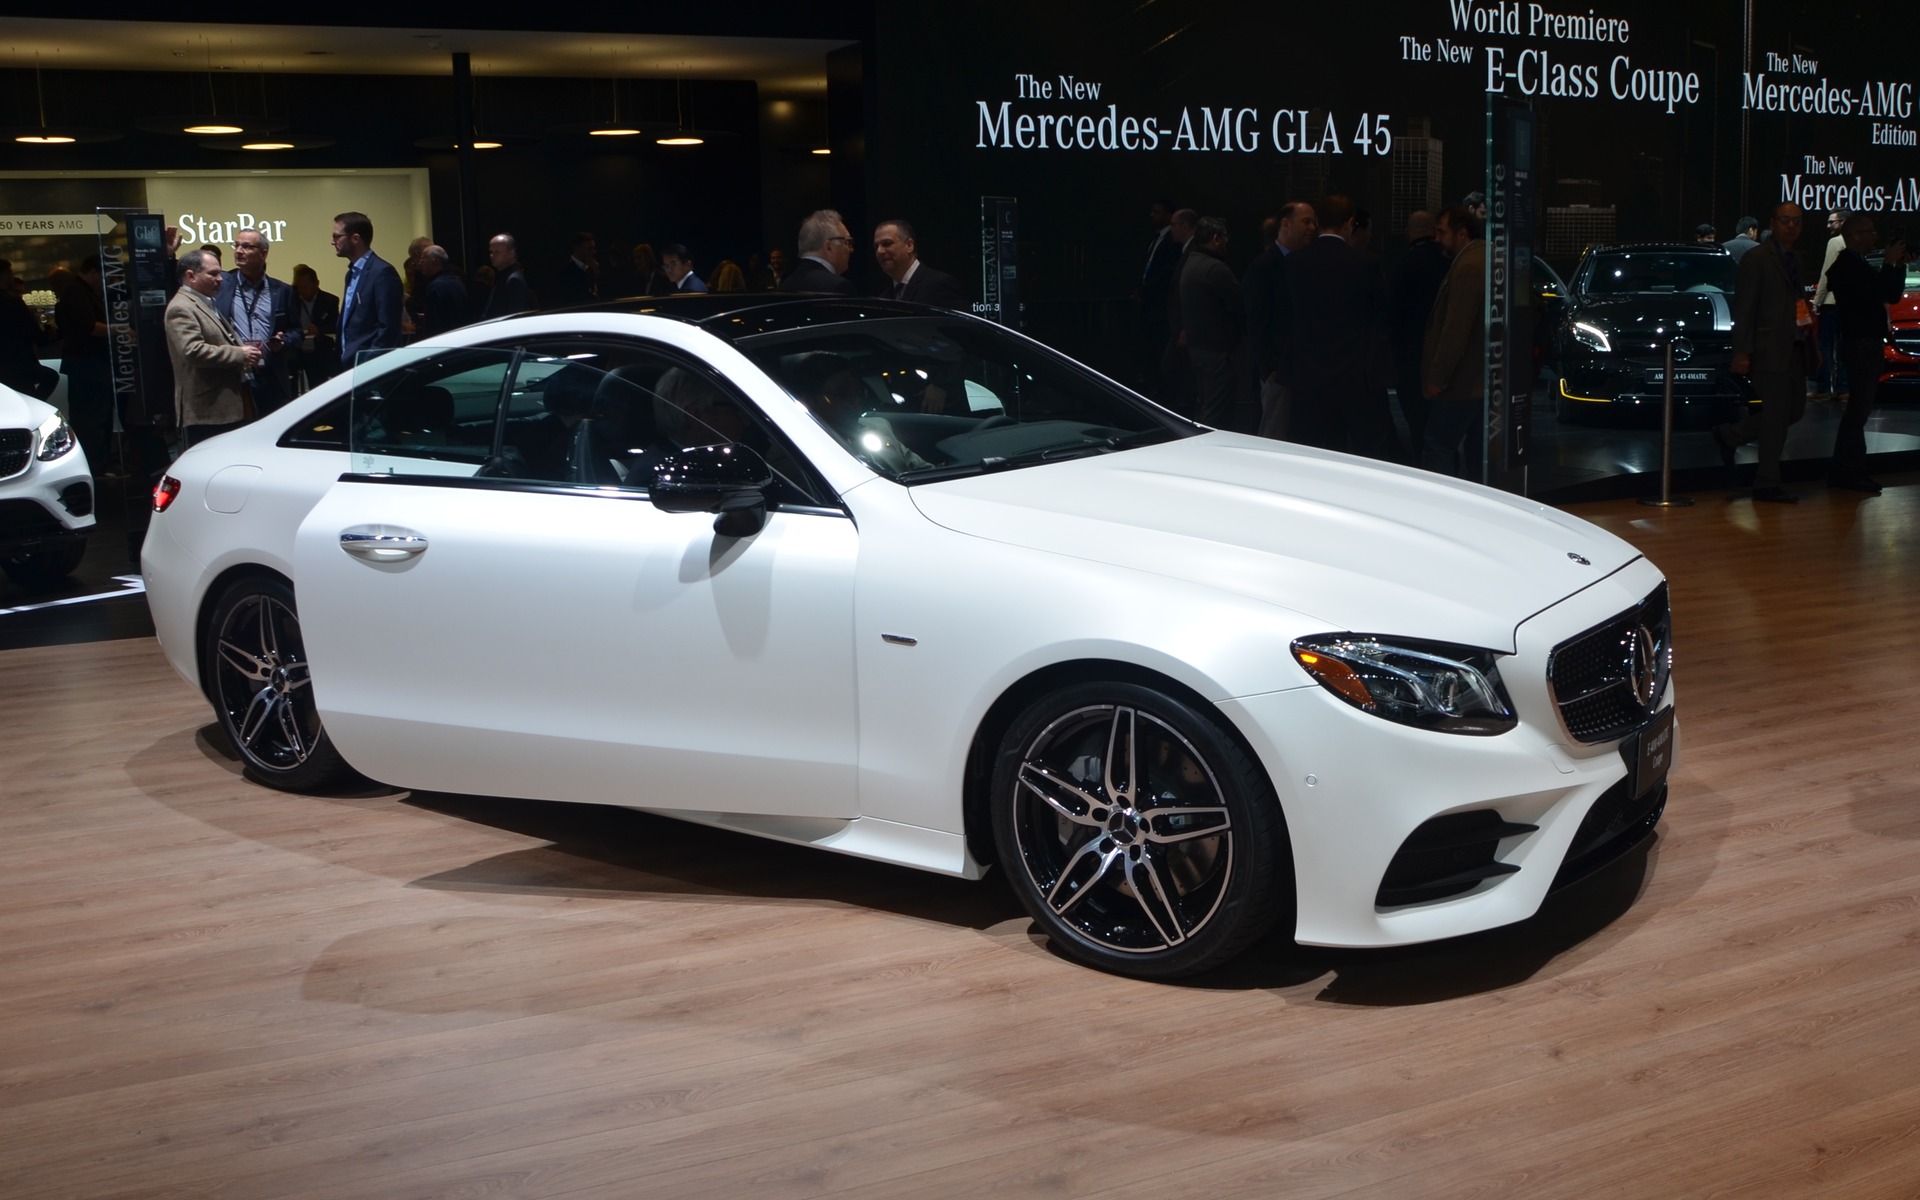 18 Mercedes Benz E Class Coupe Revealed The Car Guide